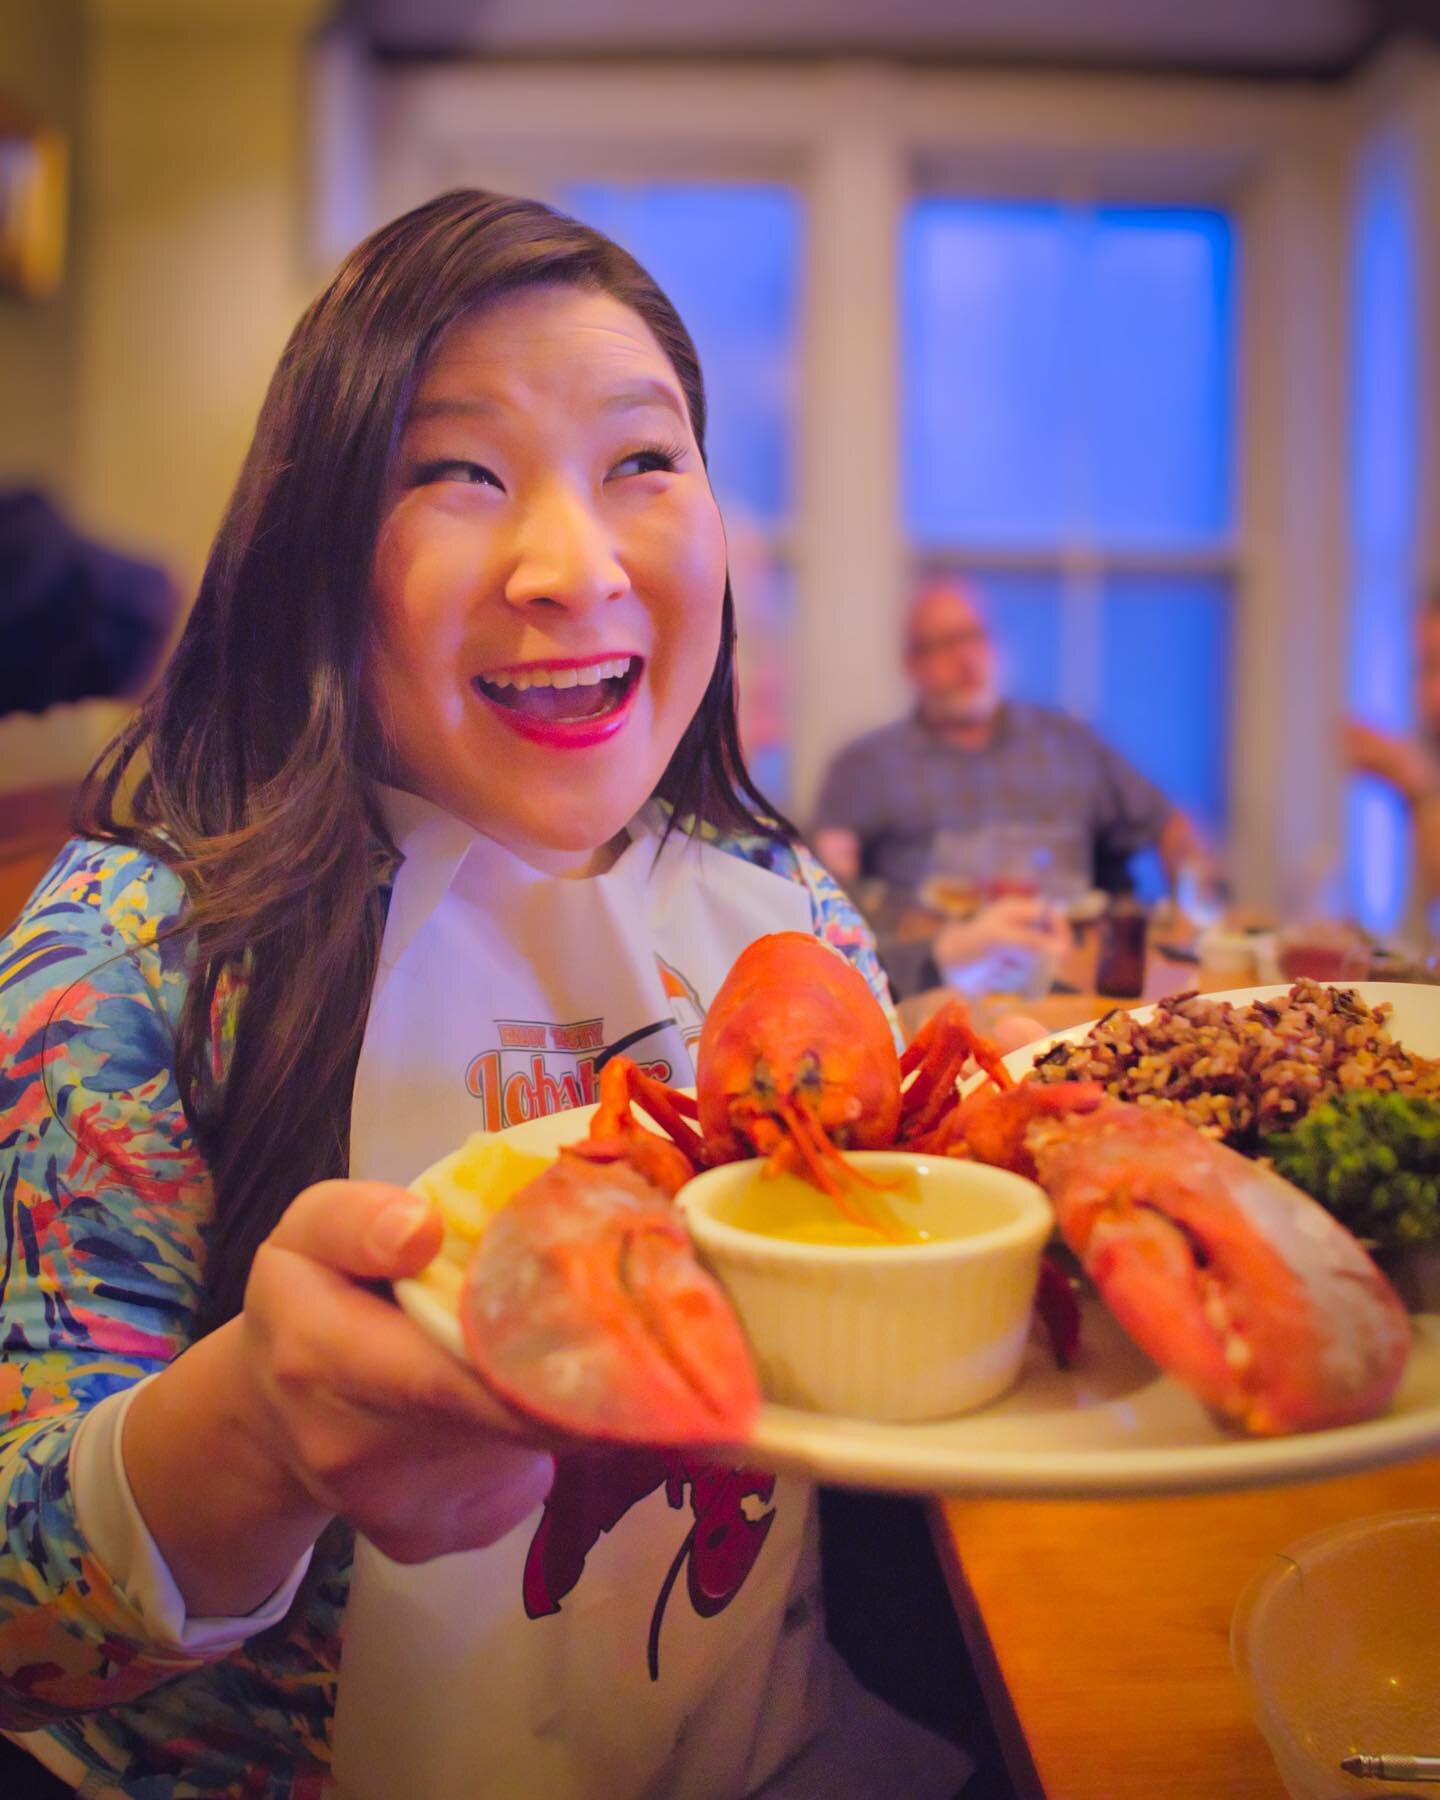 Lucky me!  Made it to MAINE and got to try lots and lotsa lobstah!! 🦞

One special day, I had a lobster immersion:
🦞 Maine Lobster Roll
🦞 Maine Lobster Bisque
🦞 Whole Maine Lobster 
🦞 Maine Lobster Ice Cream 🍦 

YESSSSS--light butter-flavored i